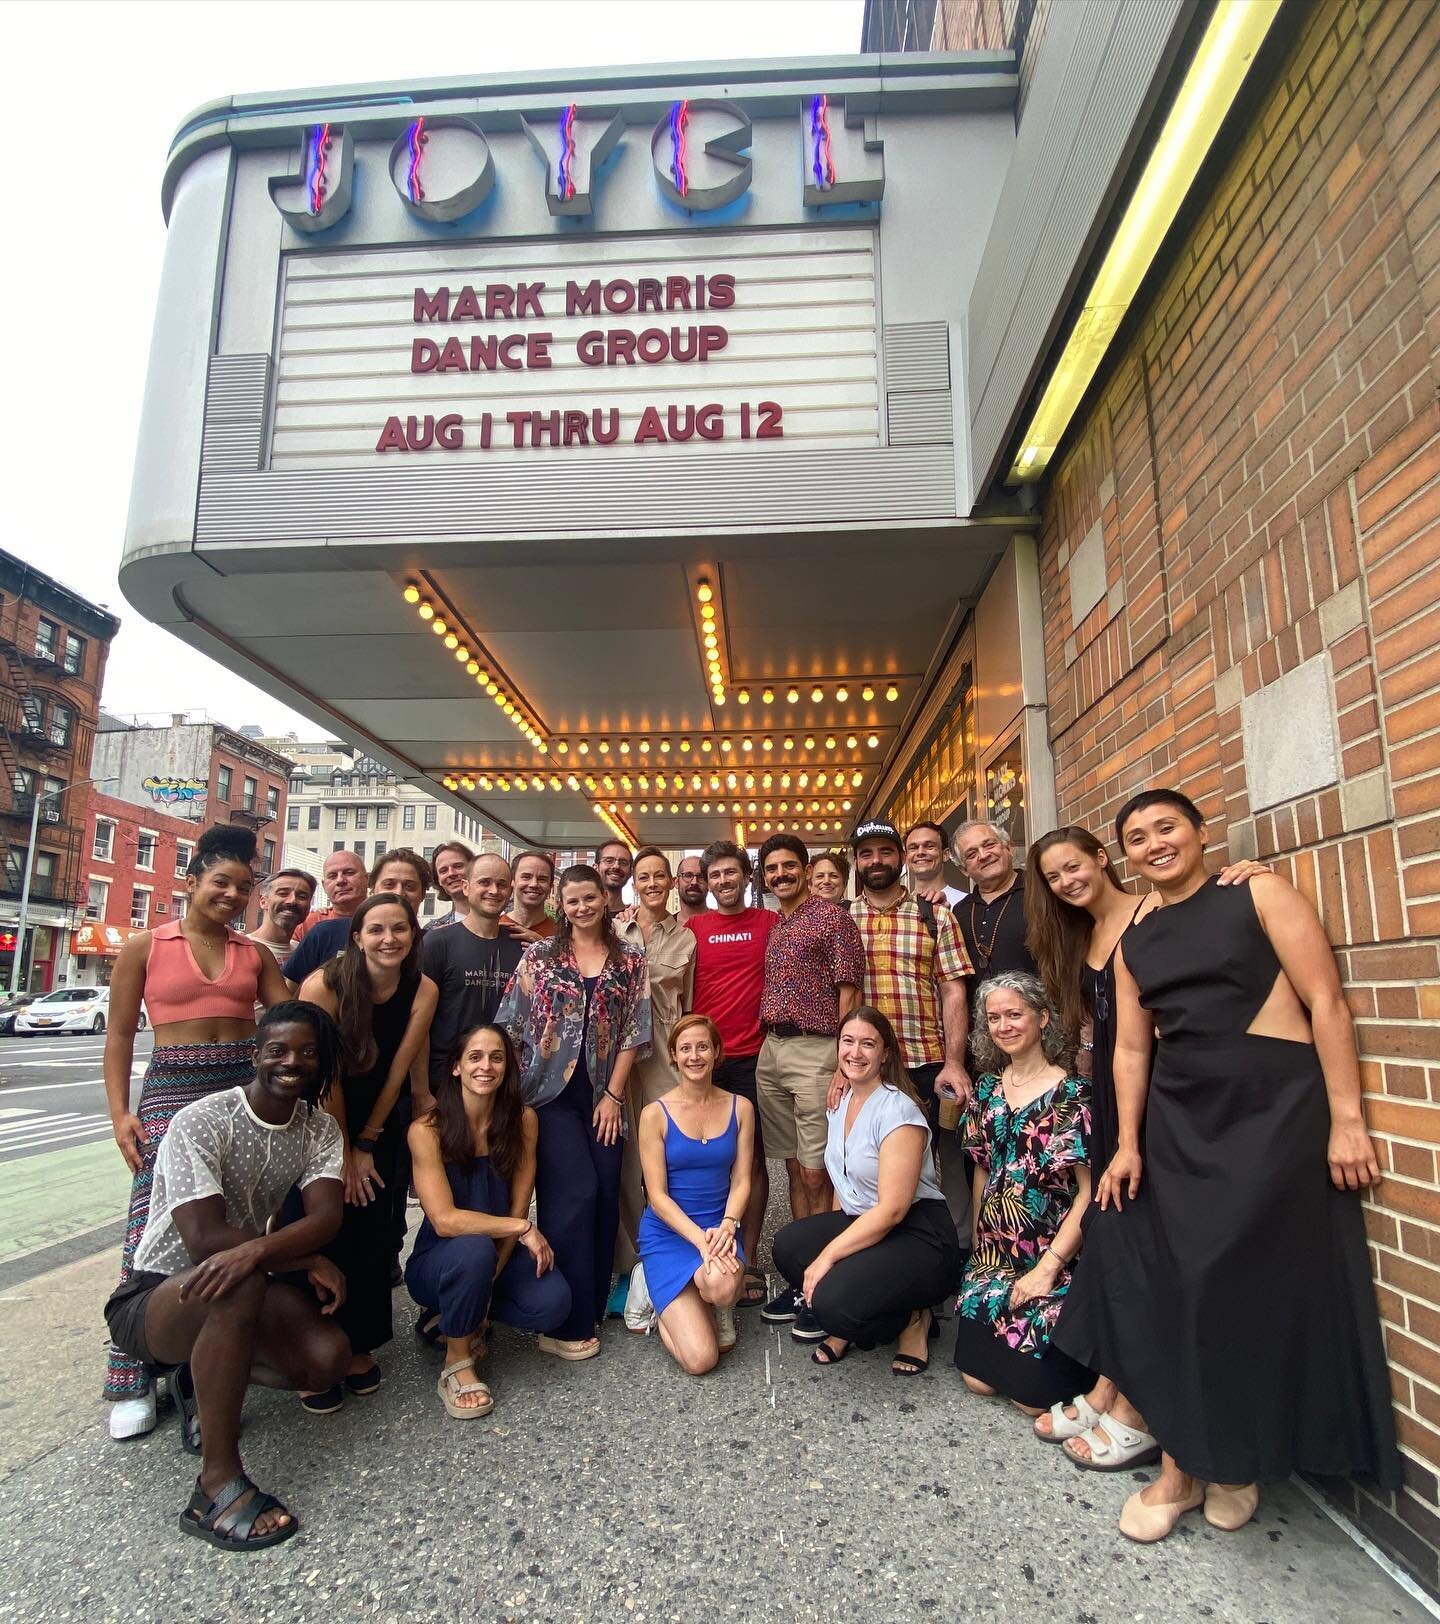 ✨Two Amazing Weeks @thejoycetheater with @markmorrisdance ✨
&bull;
&bull;
We did it! Grateful, tired, and oh so fulfilled. Love dancing with my @markmorrisdance fam and sharing what we love to do with the incredible dance goers in NYC. 
&bull;
&bull;